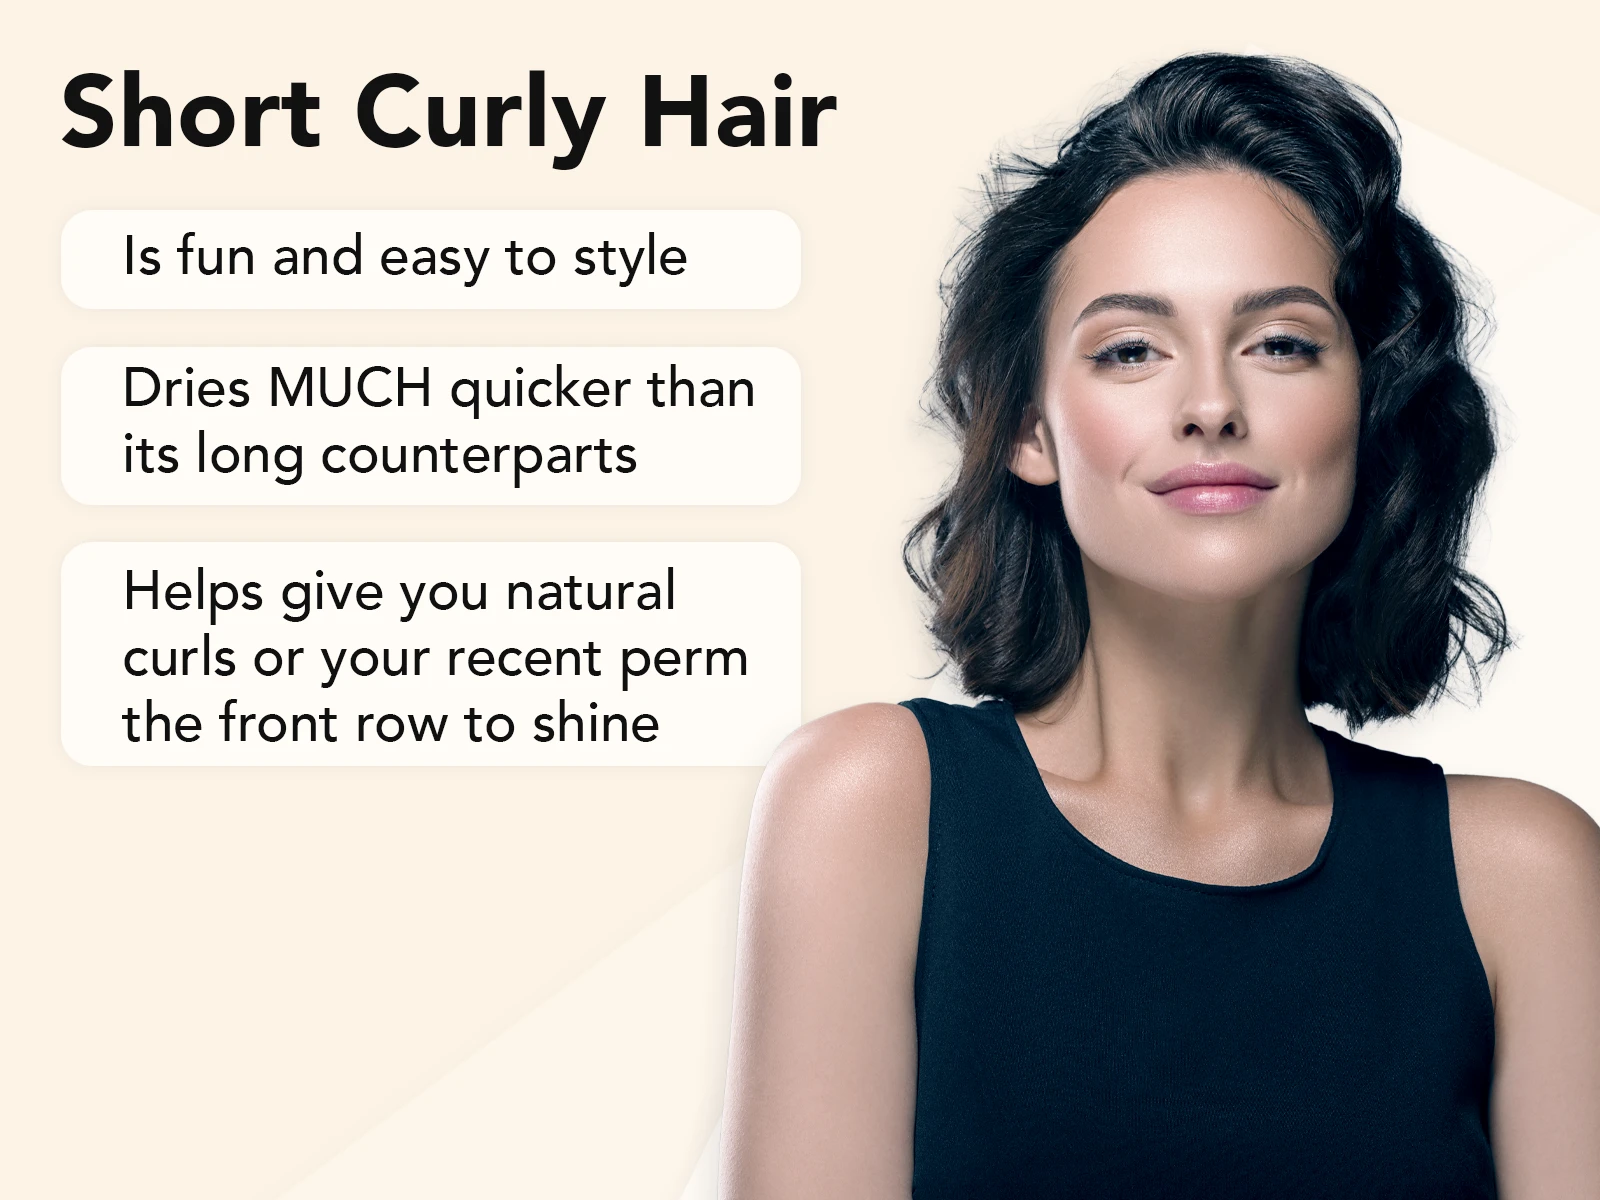 Short curly hair explainer image on a tan background